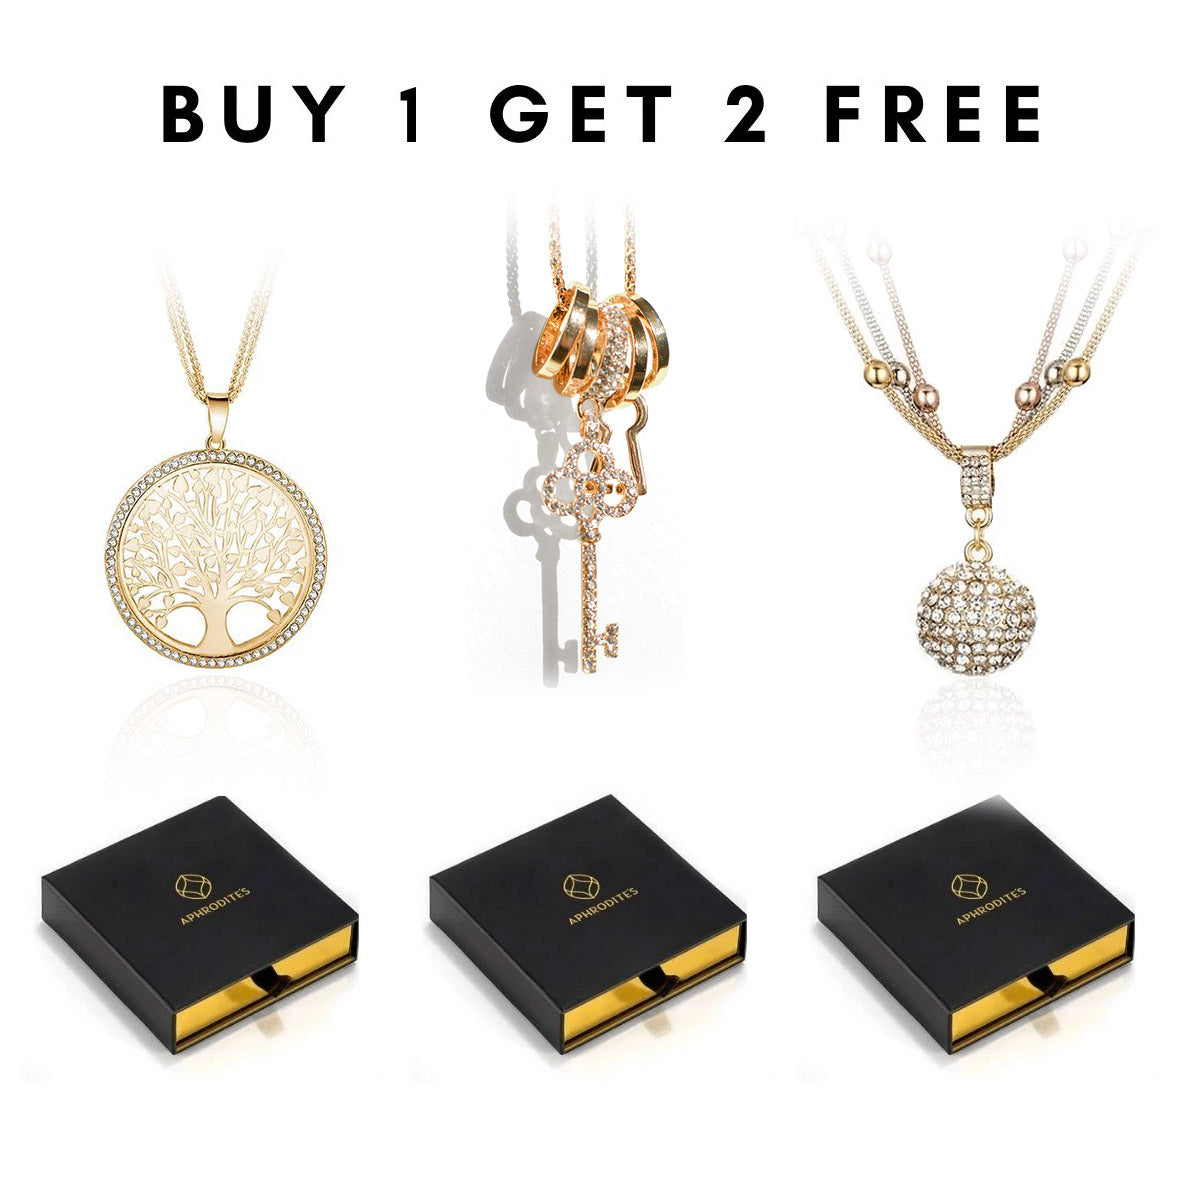 BUY 1 GET 2 FREE Glam Trio of Golden Necklaces